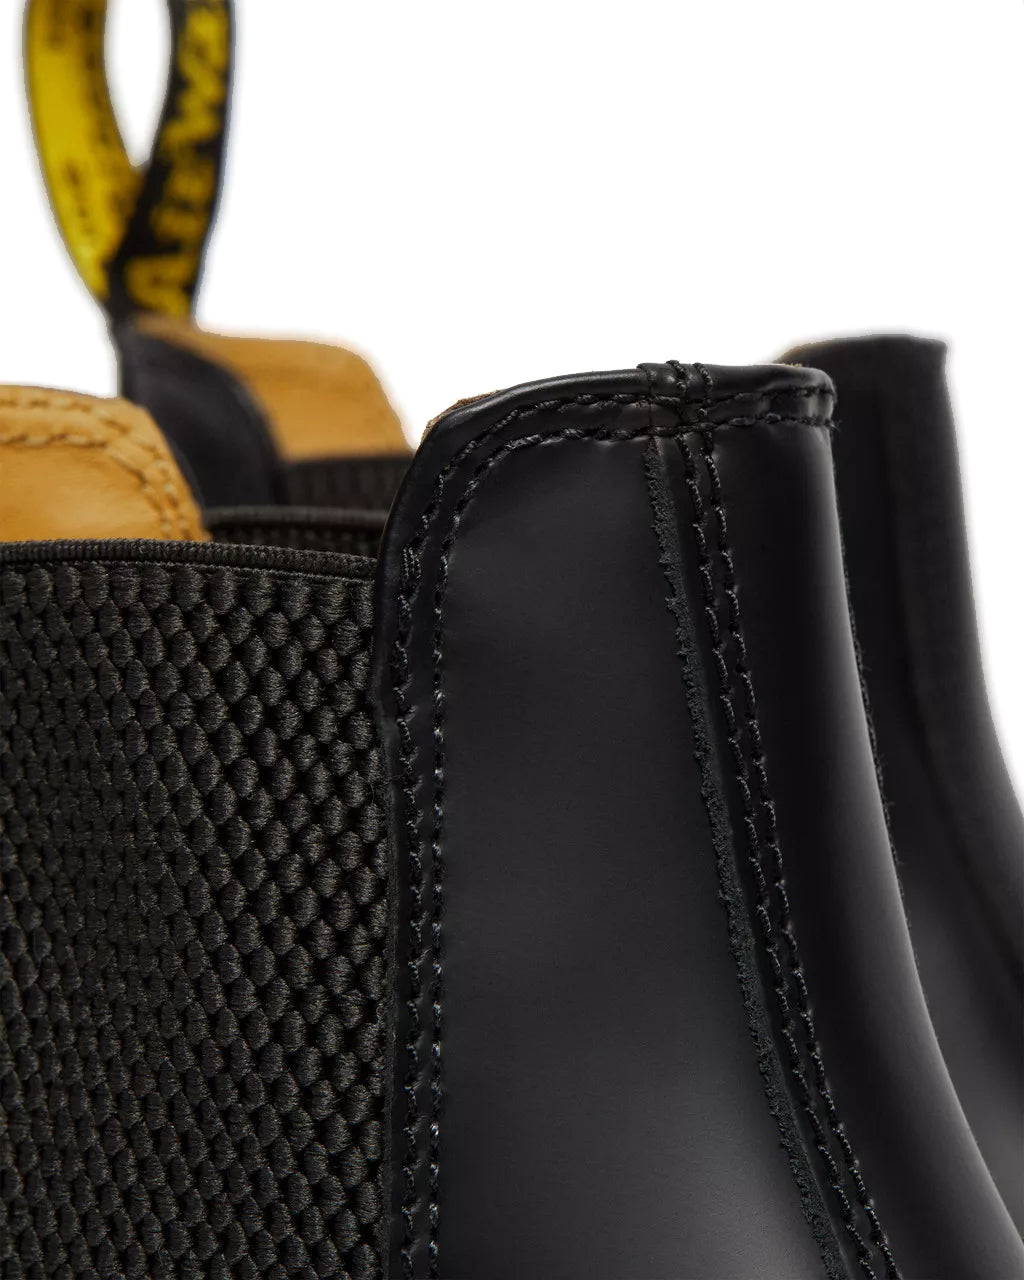 Detail shot of a pair of mid-ankle Dr. Martens black leather chelsea boots.